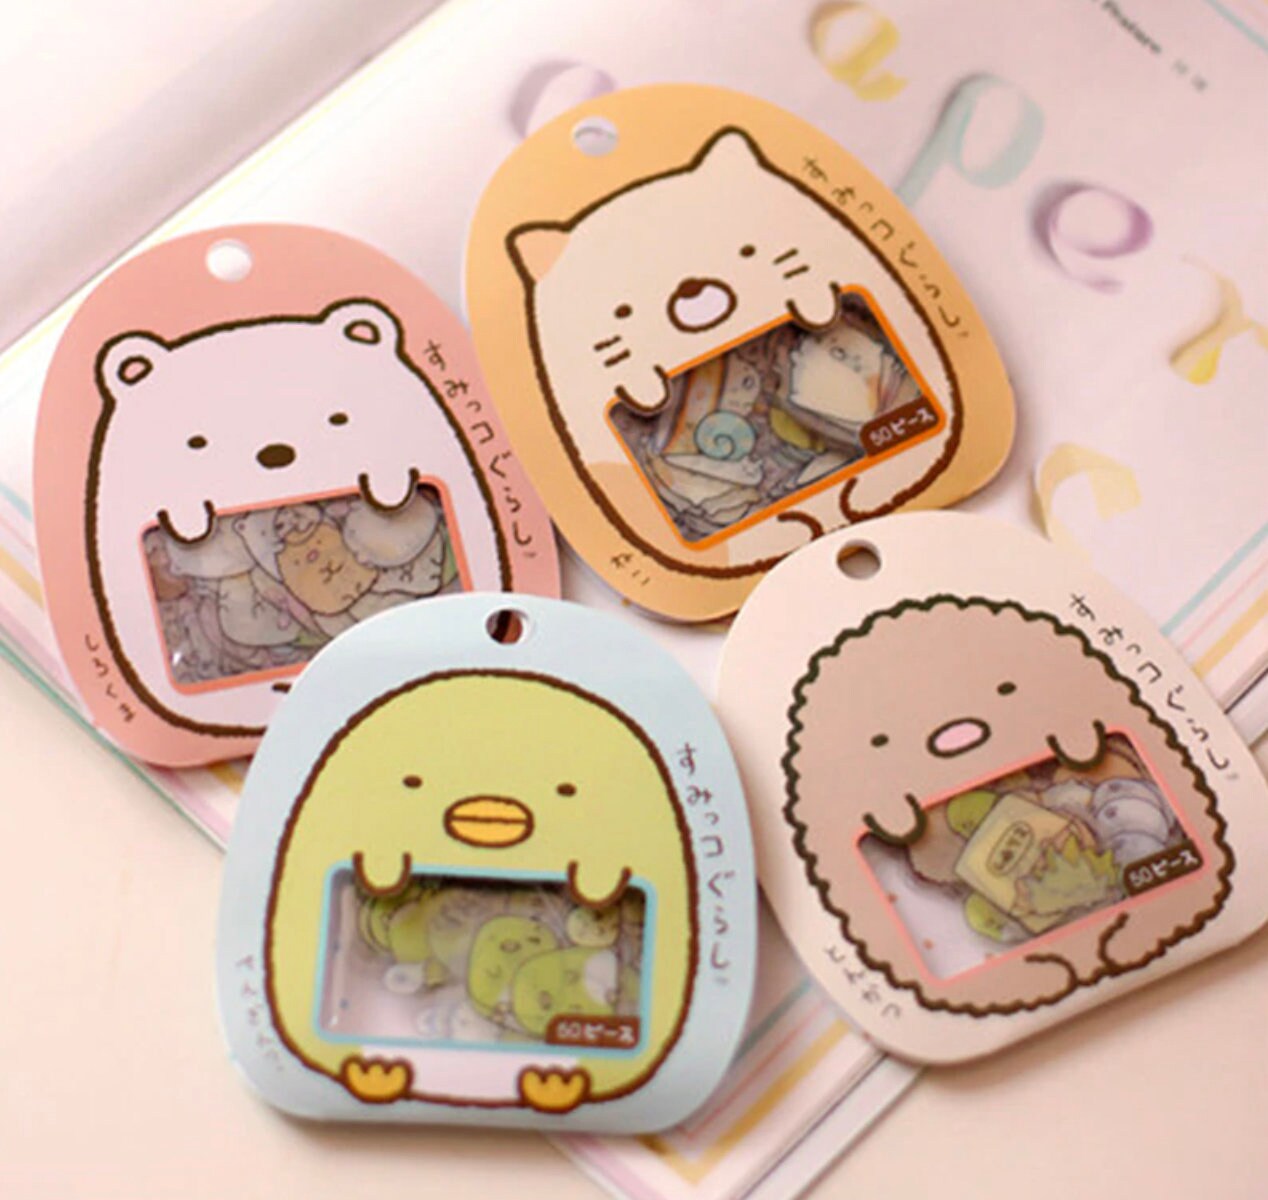  Aimeio Super Cute Cartoon Animals Transparent PVC Stickers for  Diary Calendar Albums Decoration Scrapbook Planner Journal Child DIY Toy  School Office Supplies,4 Pack,200 Pieces : Office Products